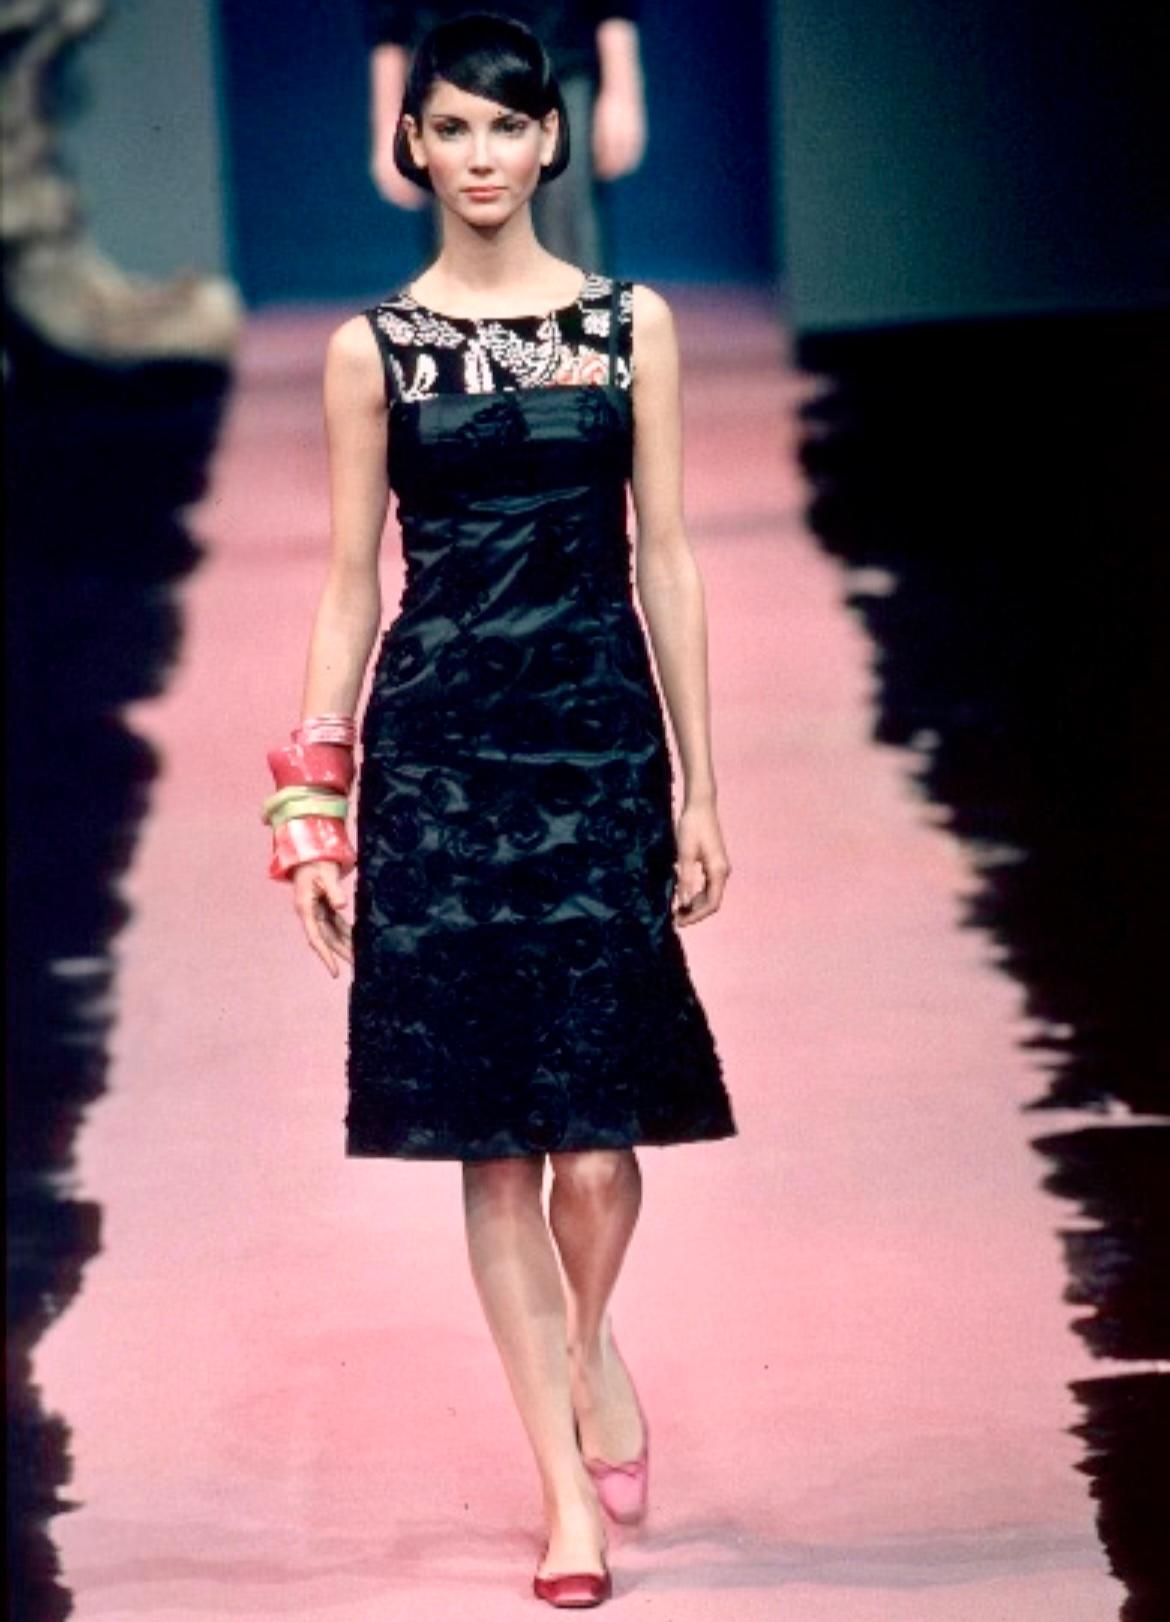 This beautiful black strapless gown was created for the Christian Lacroix Spring/Summer 1999 collection, with similar pieces being highlighted on the season's runway. Classically chic, this floor-length gown features floral appliqués at the skirt, a